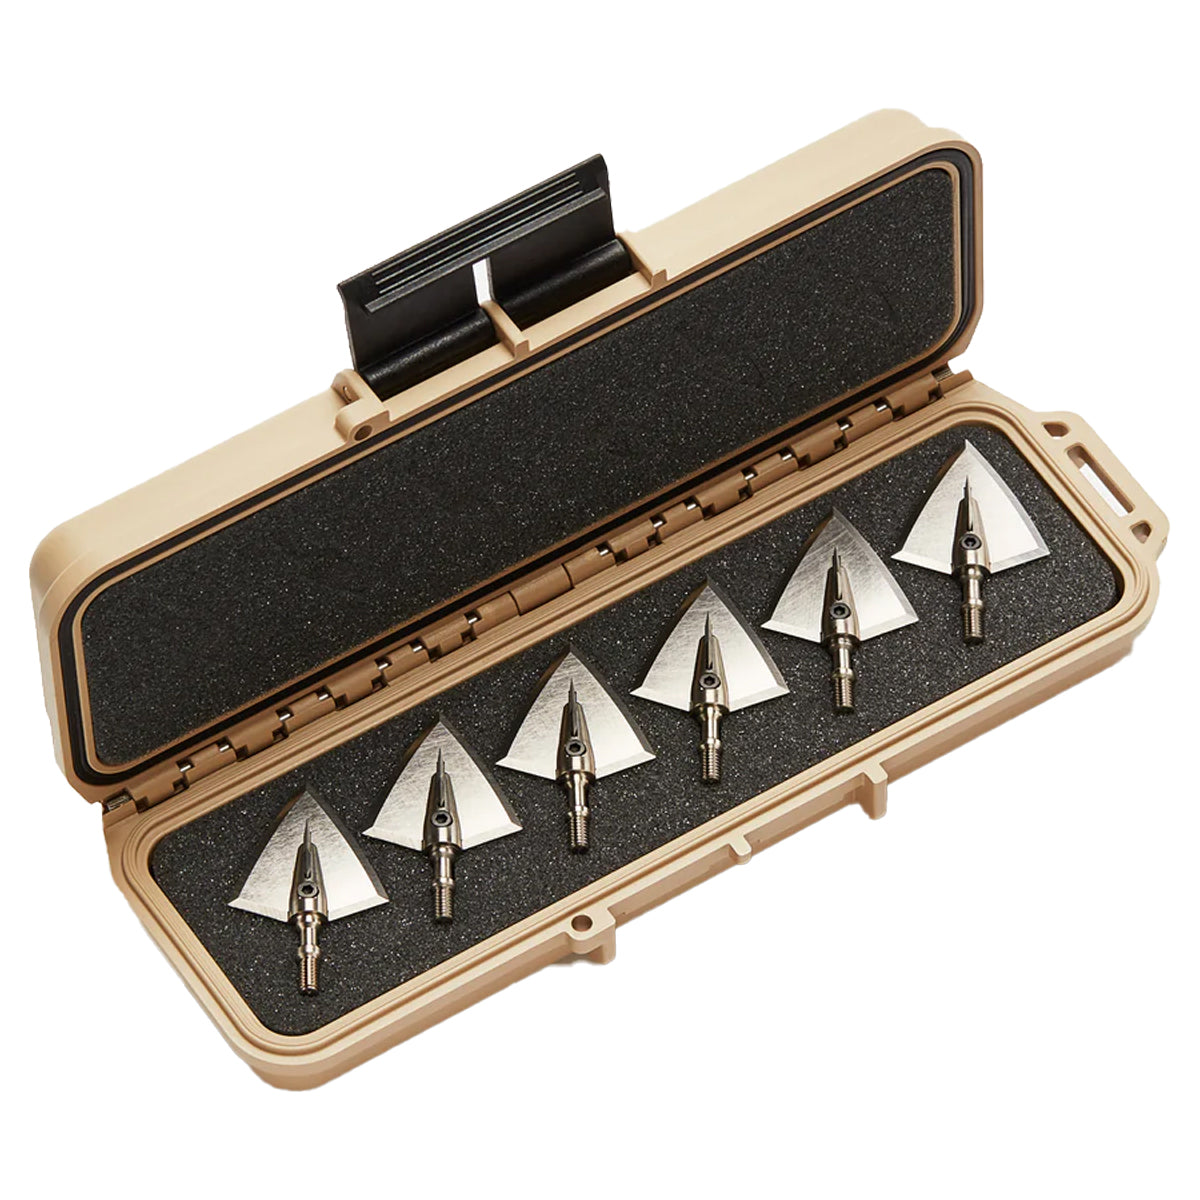 Day Six Gear Evo-X 175 Grain Broadheads - 6 Pack with SKB Hard Case in  by GOHUNT | Day Six - GOHUNT Shop